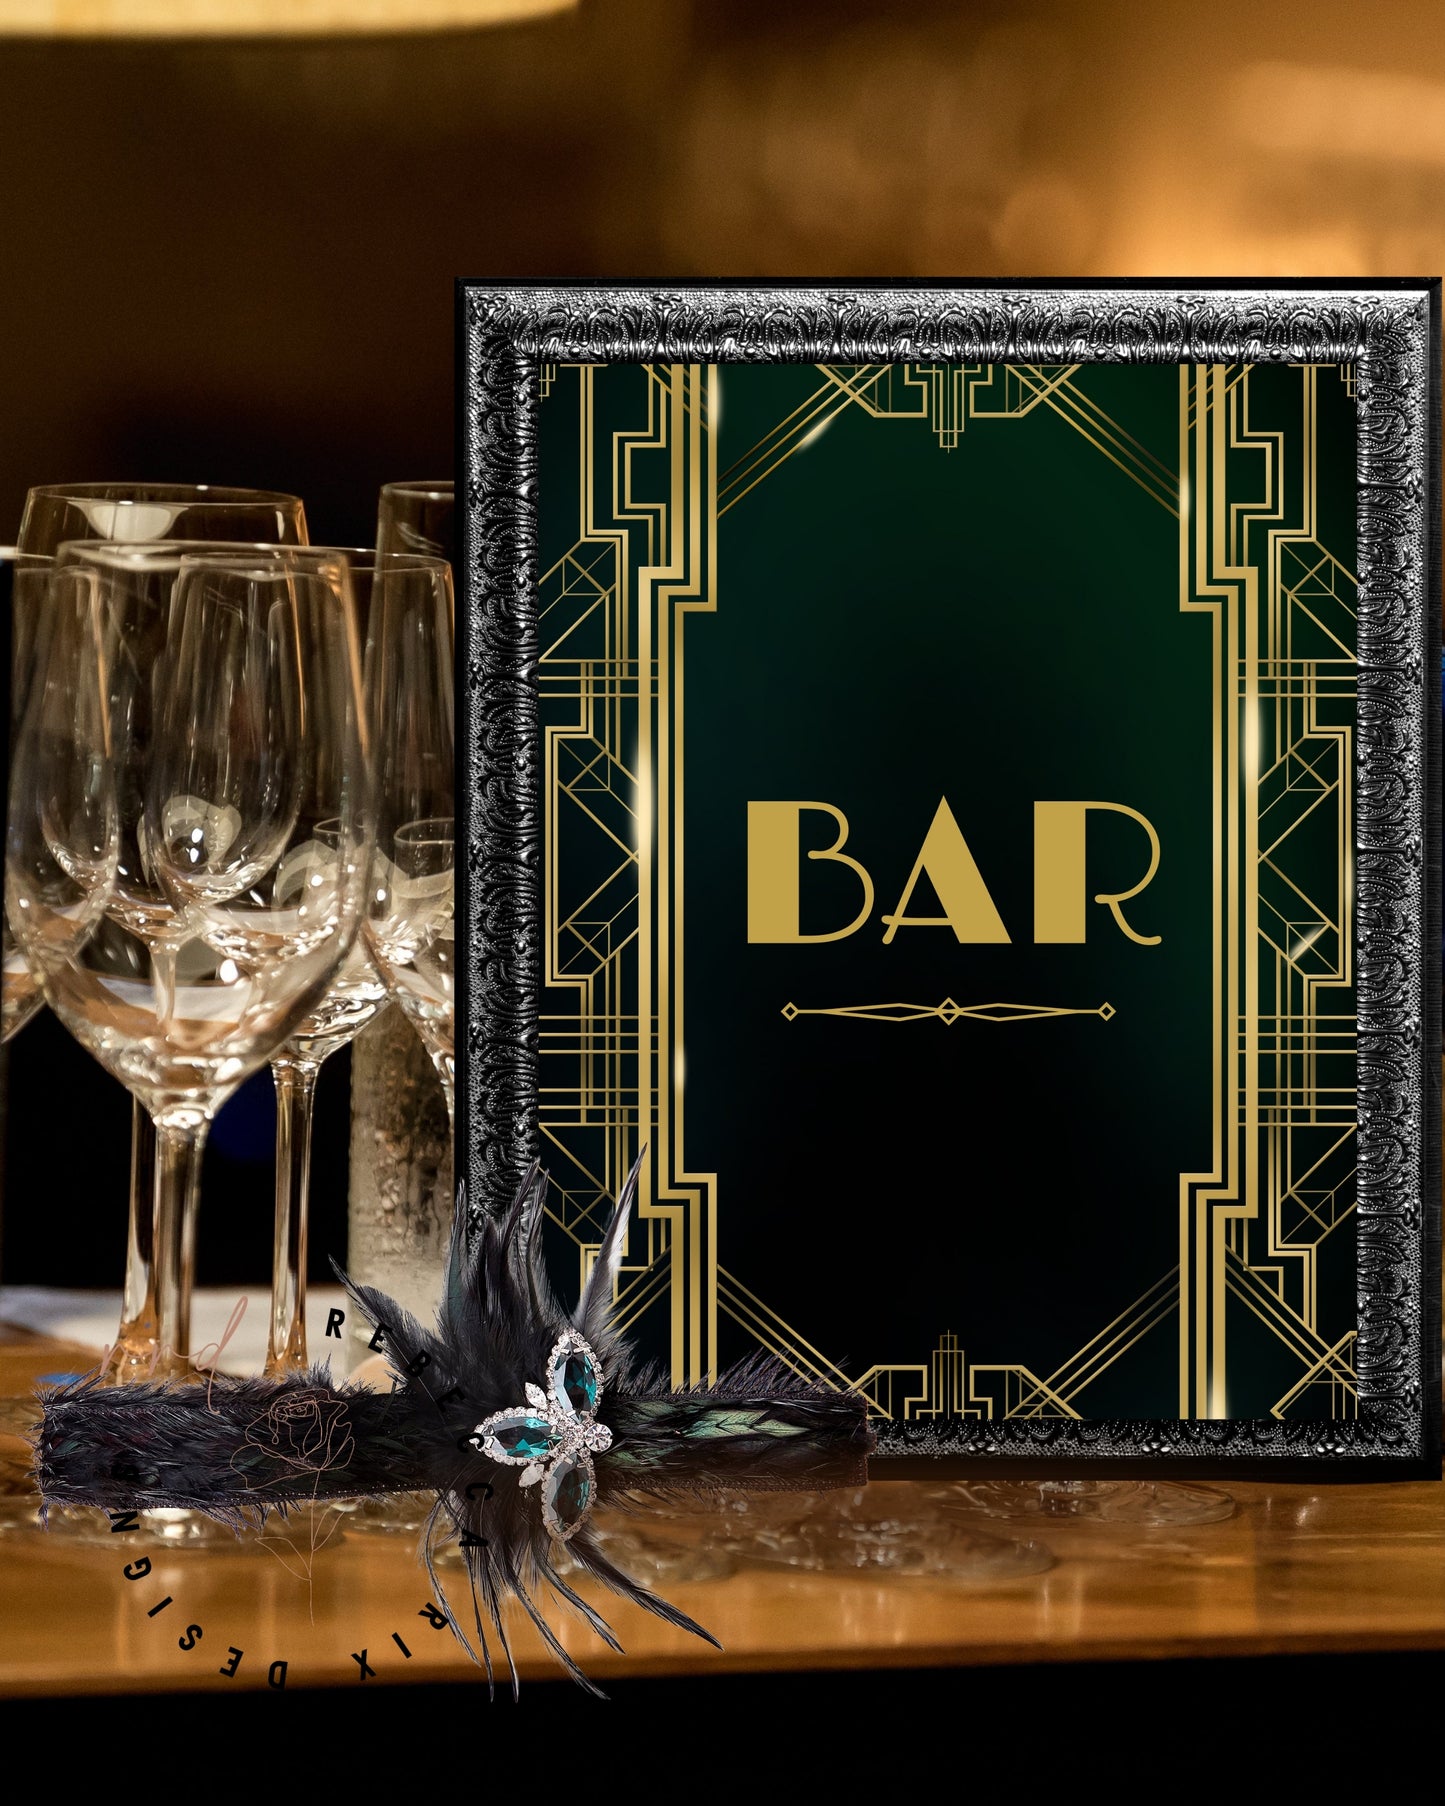 "Bar" Art Deco Printable Party Sign For Great Gatsby or Roaring 20's Party Or Wedding, Black & Gold, Printable Party Decor